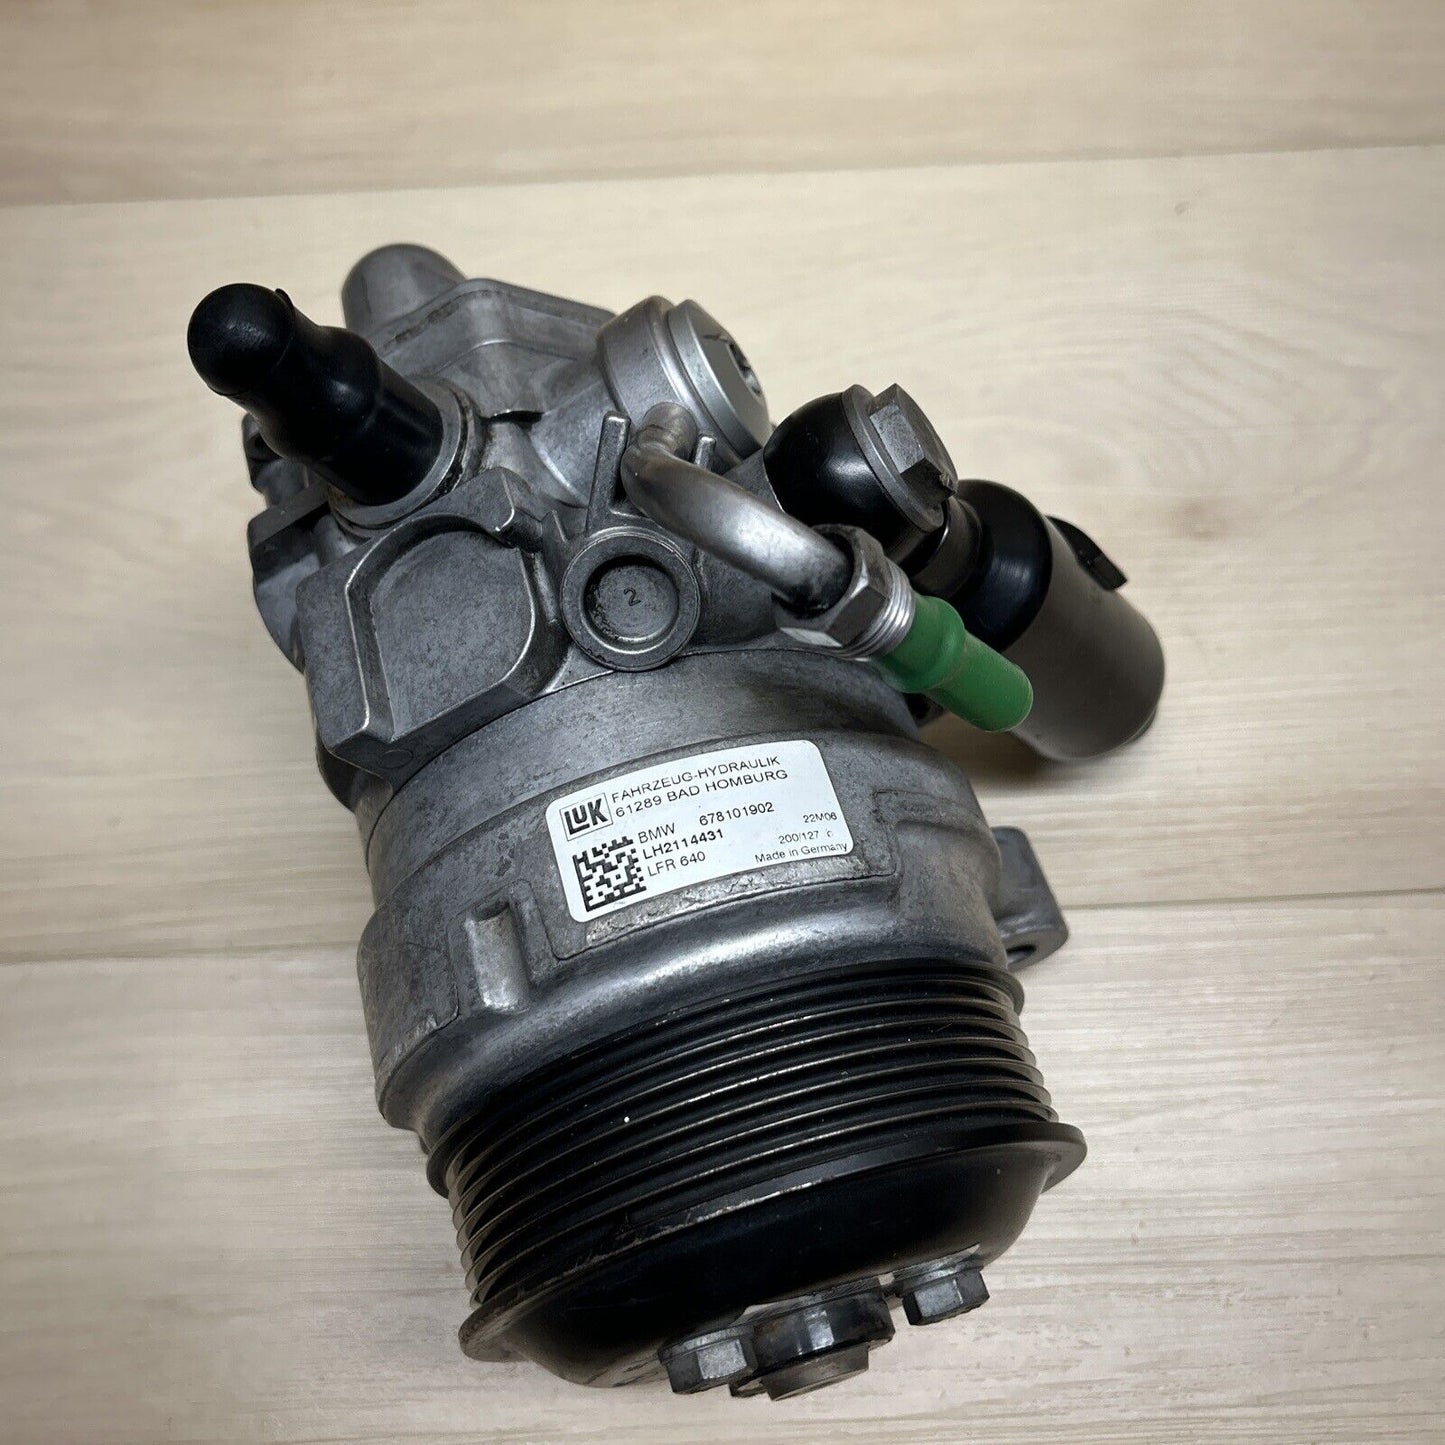 2007-2008 BMW E70 X5 4.8I AWD ACTIVE DRIVE POWER STEERING TANDEM PUMP 678101902